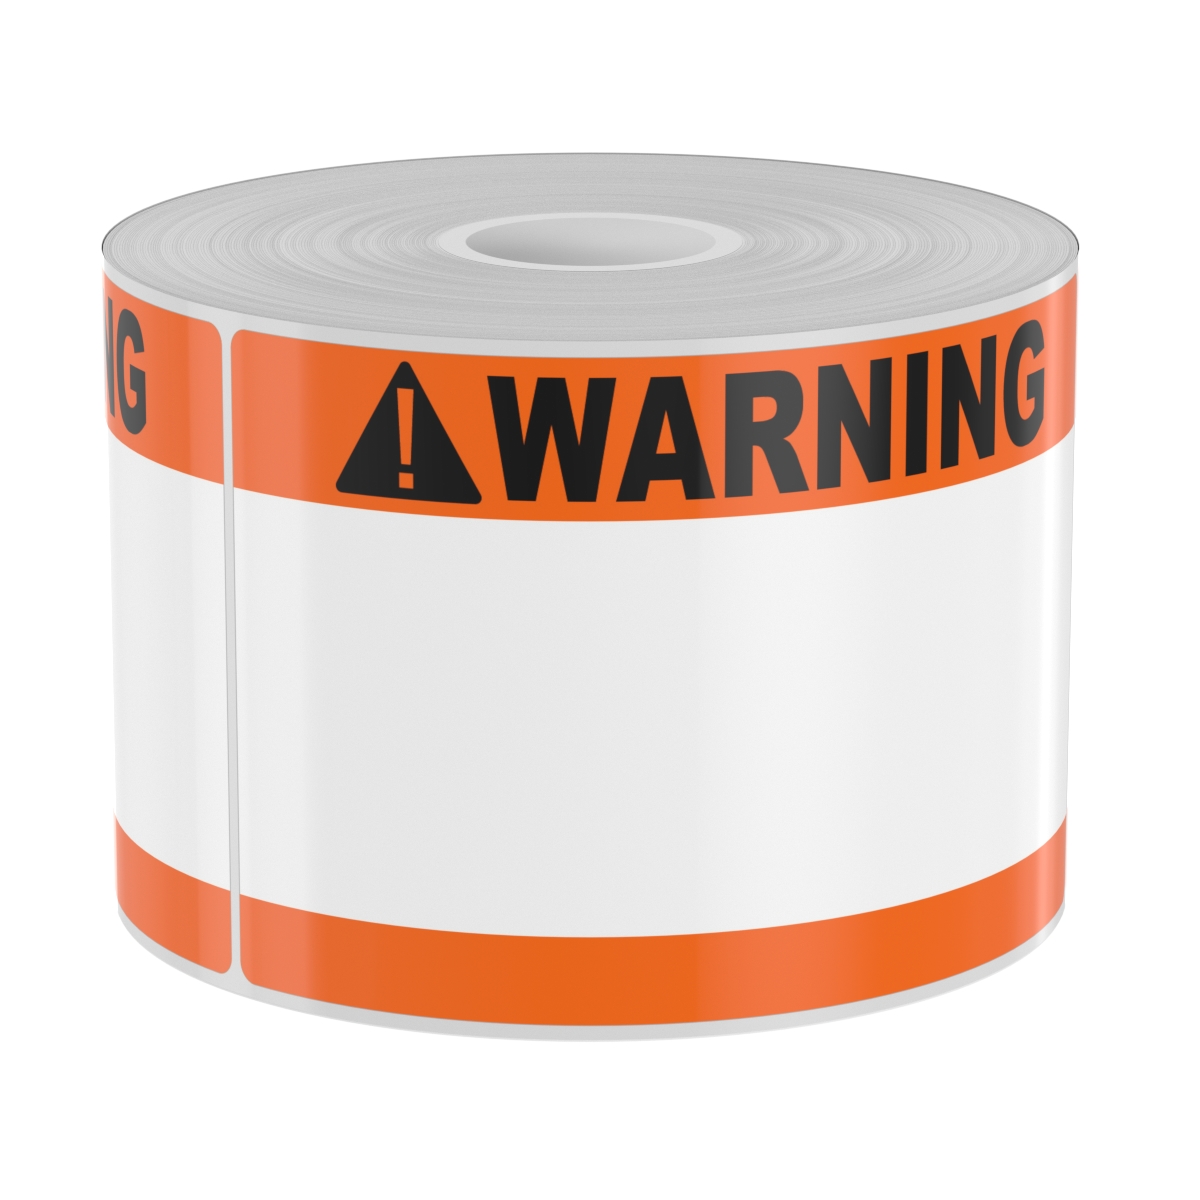 Detail view for 250 3" x 5" High-Performance Orange Double Band with Black Warning